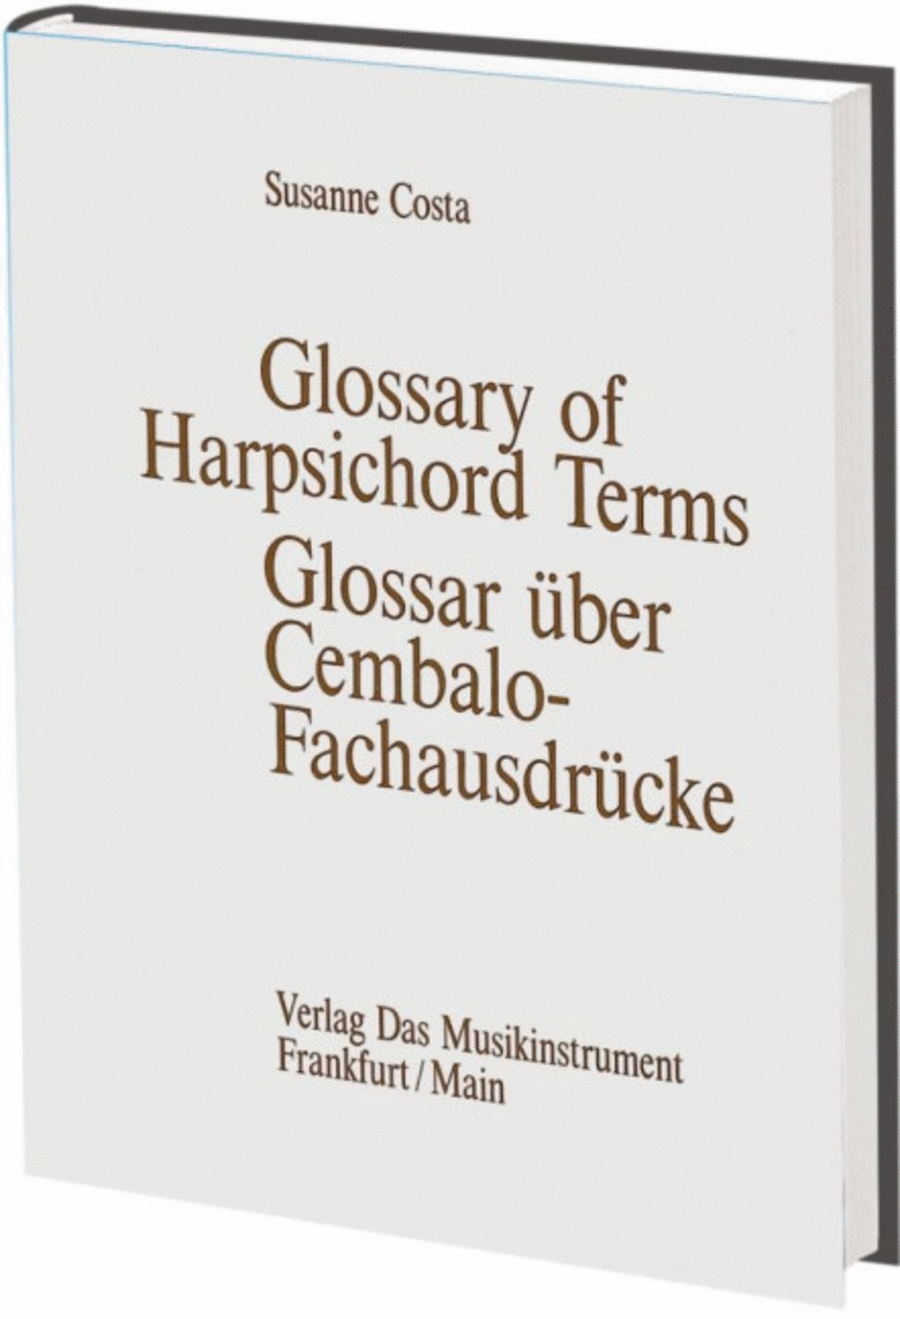 Glossary of Harpsichord Terms